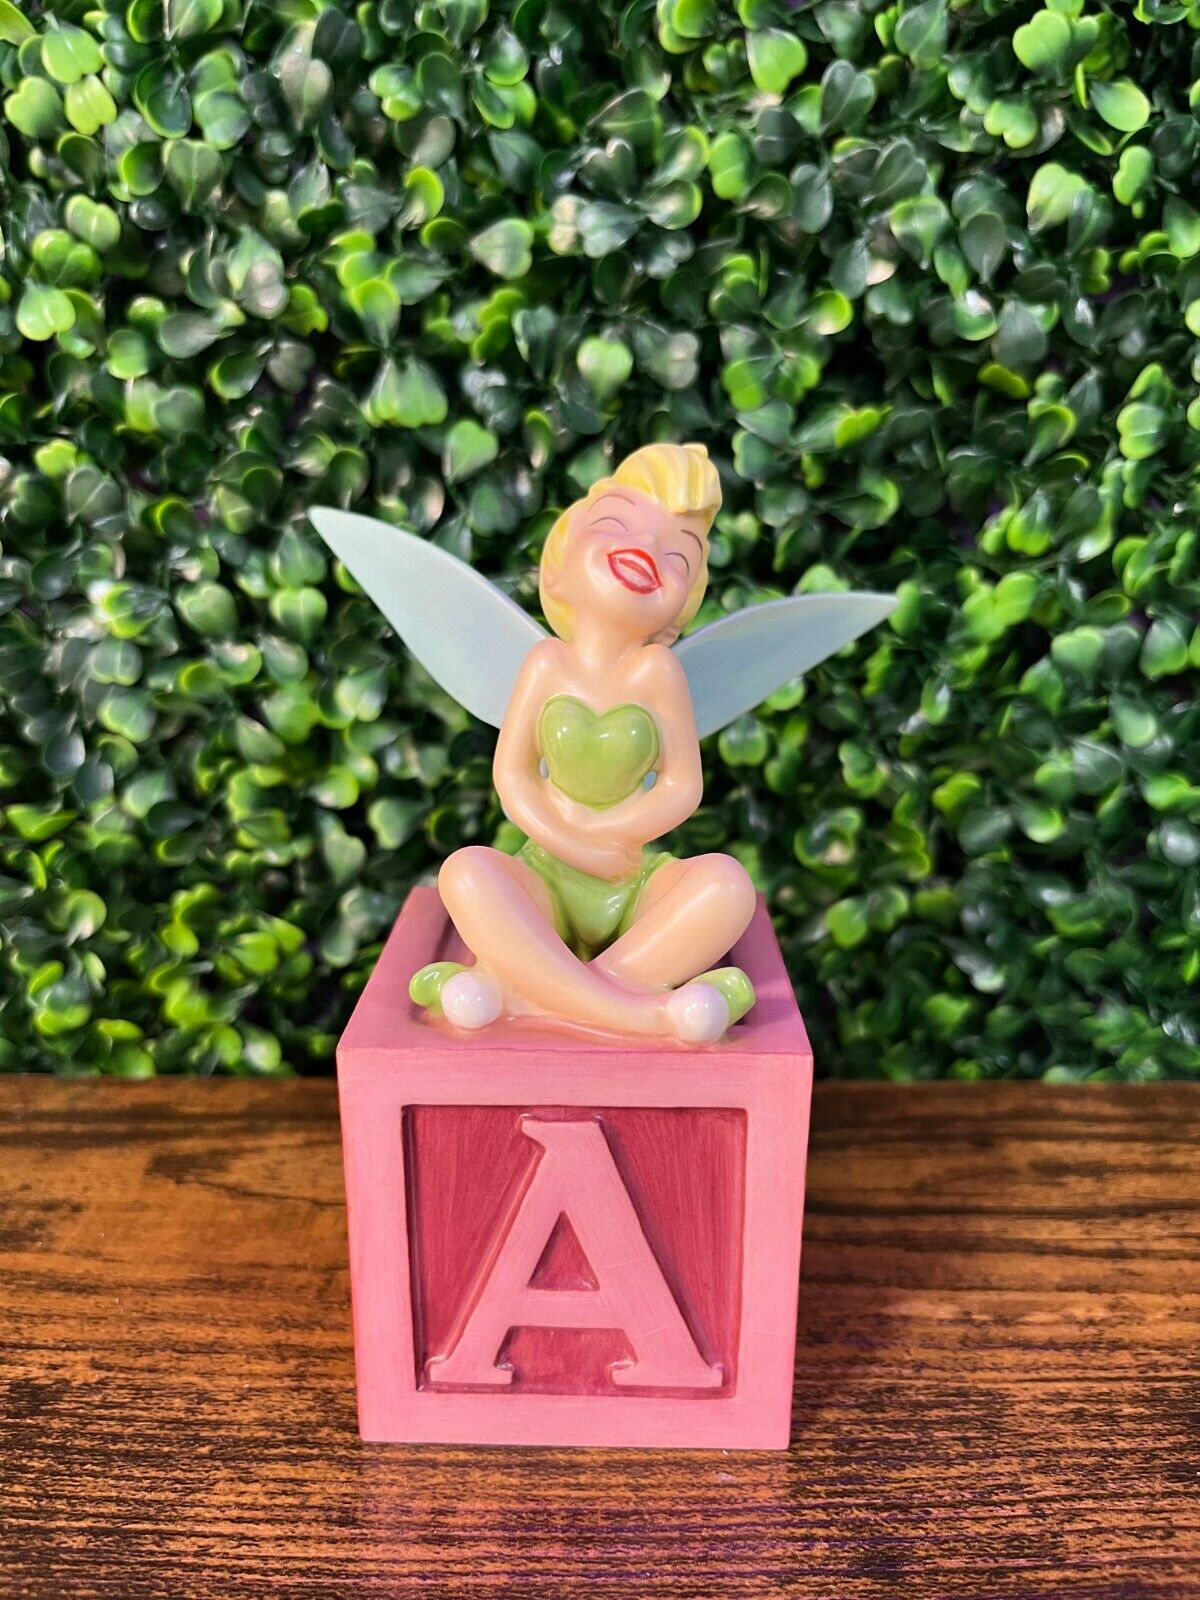 WDCC Tinkerbell A FIREFLY PIXIE AMAZING Ltd Ed  No box or COA